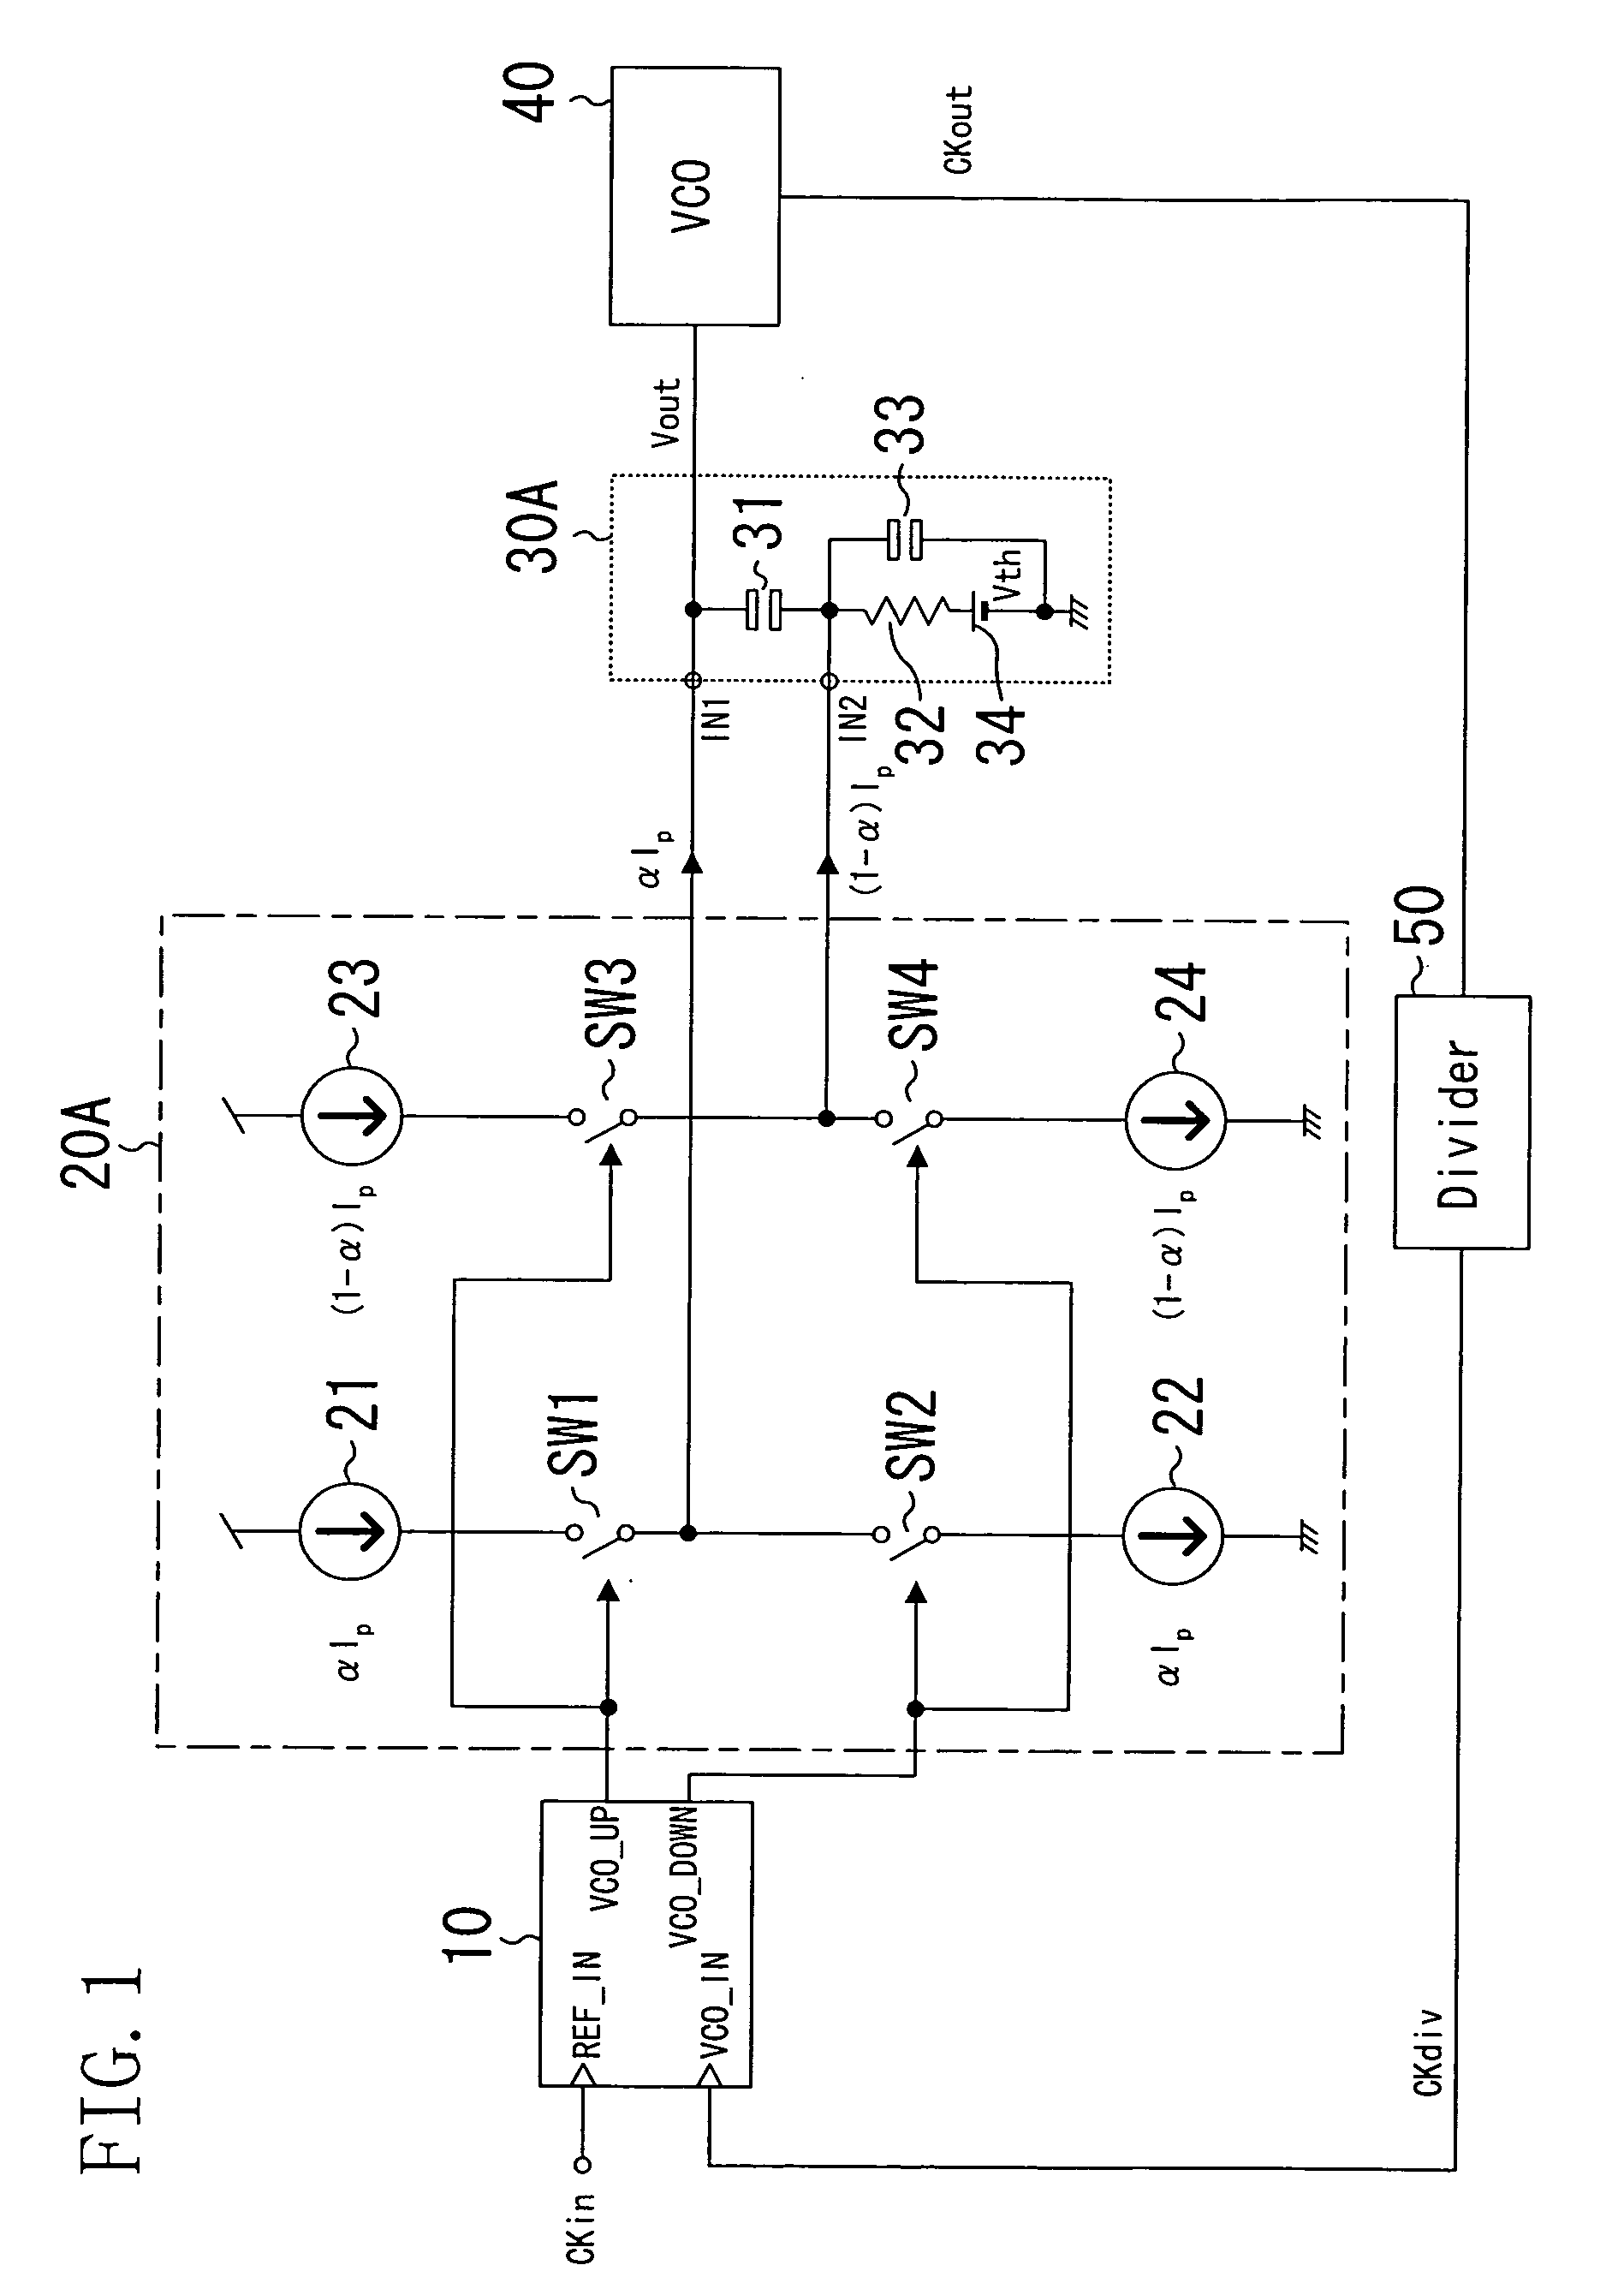 Low-pass filter and feedback system